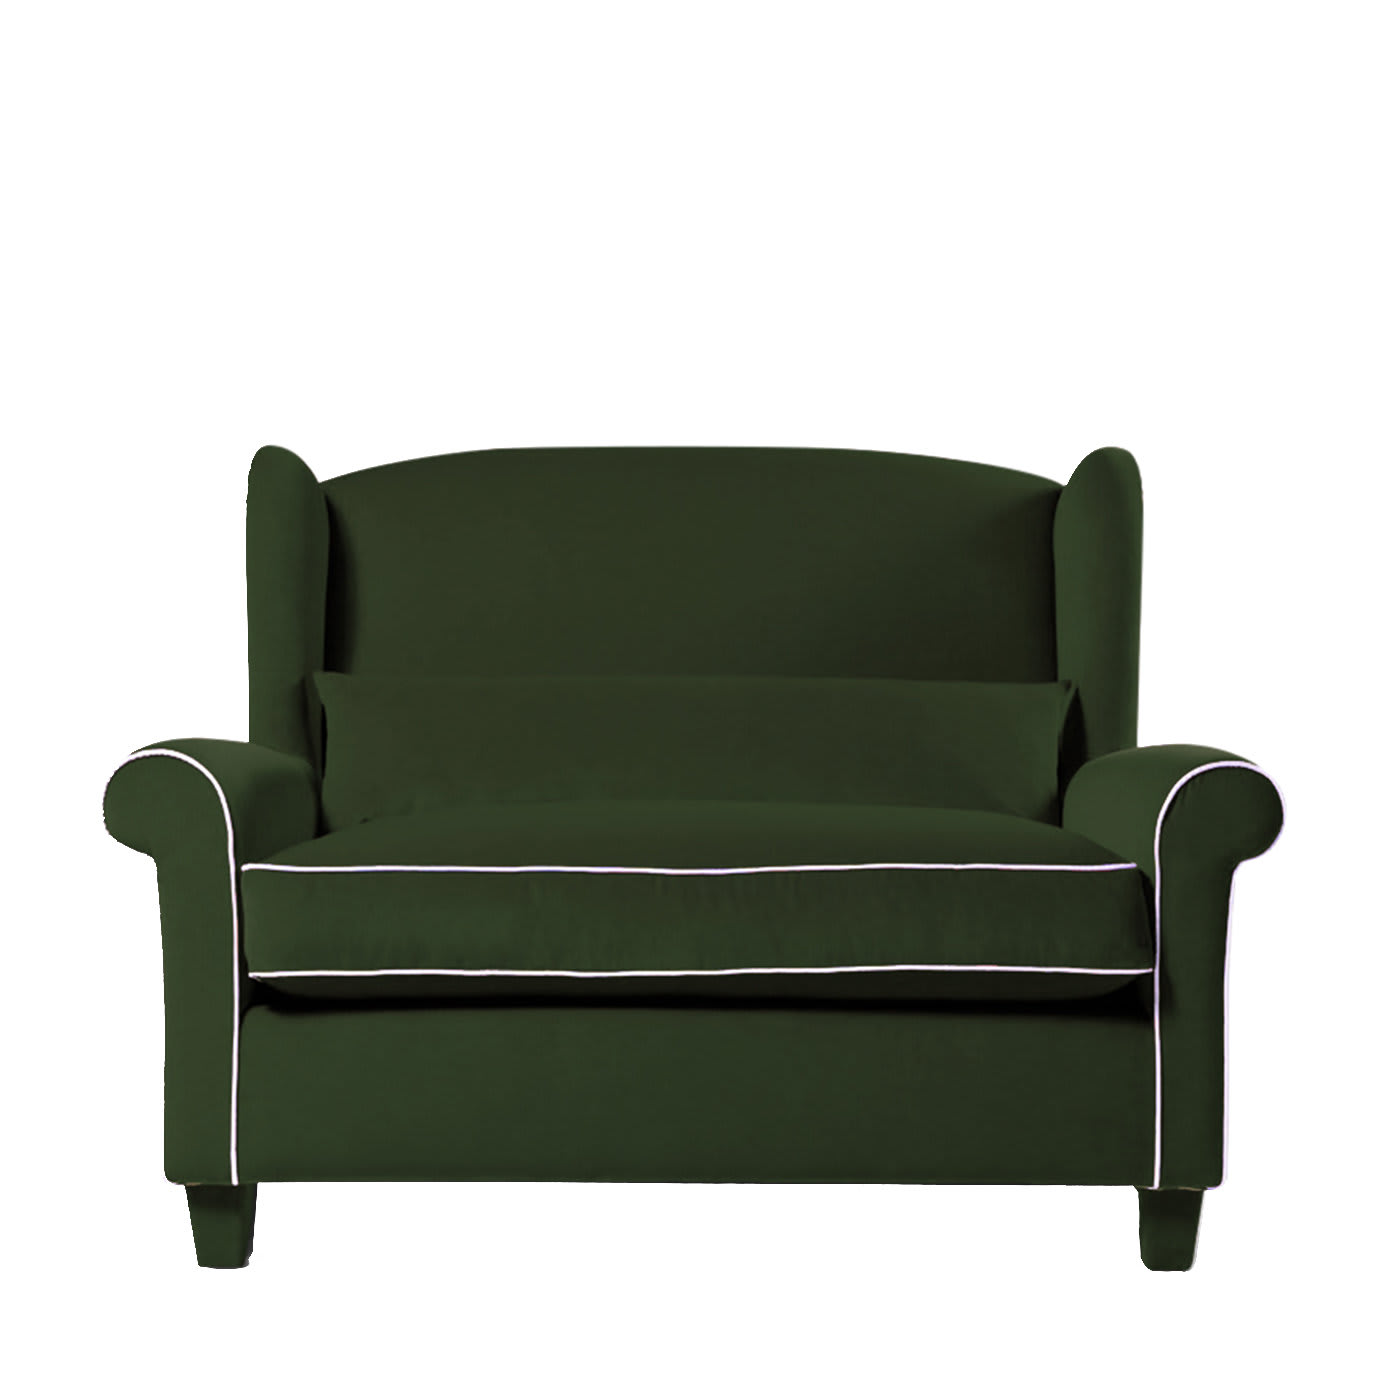 Alexander Green Armchair by Gianni G. Pellini - Editions Milano